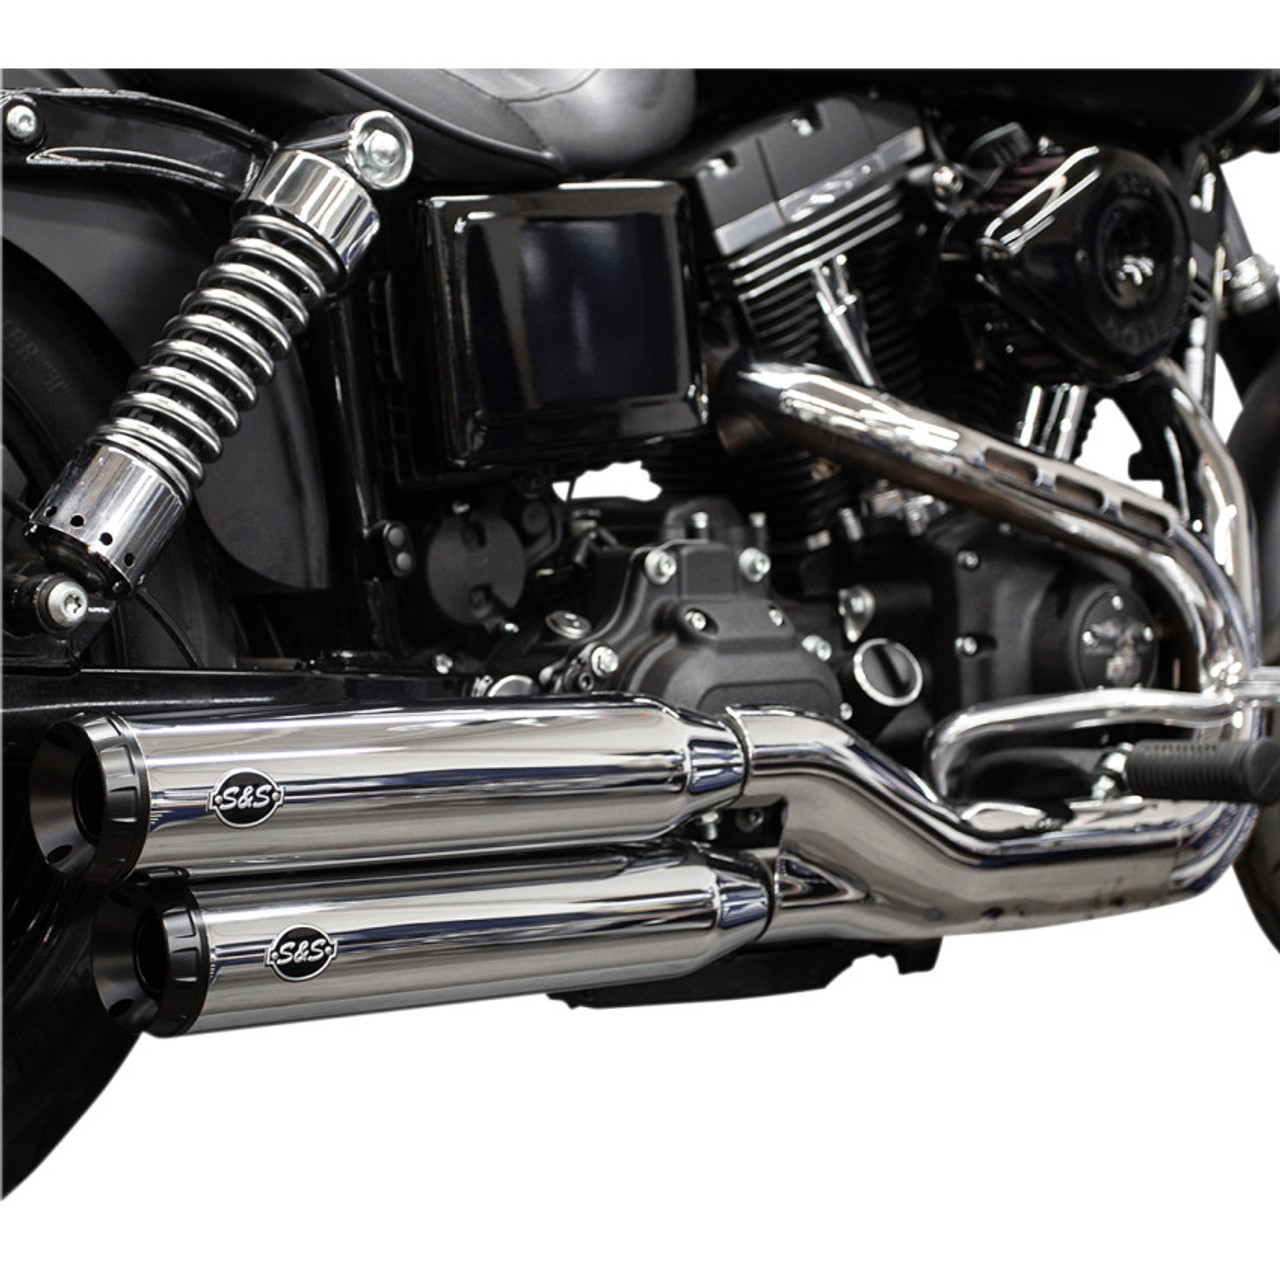 S S Grand National Slip On Mufflers For 08 17 Harley Fat Bob And Wide Glide Chrome 550 0723 Get Lowered Cycles